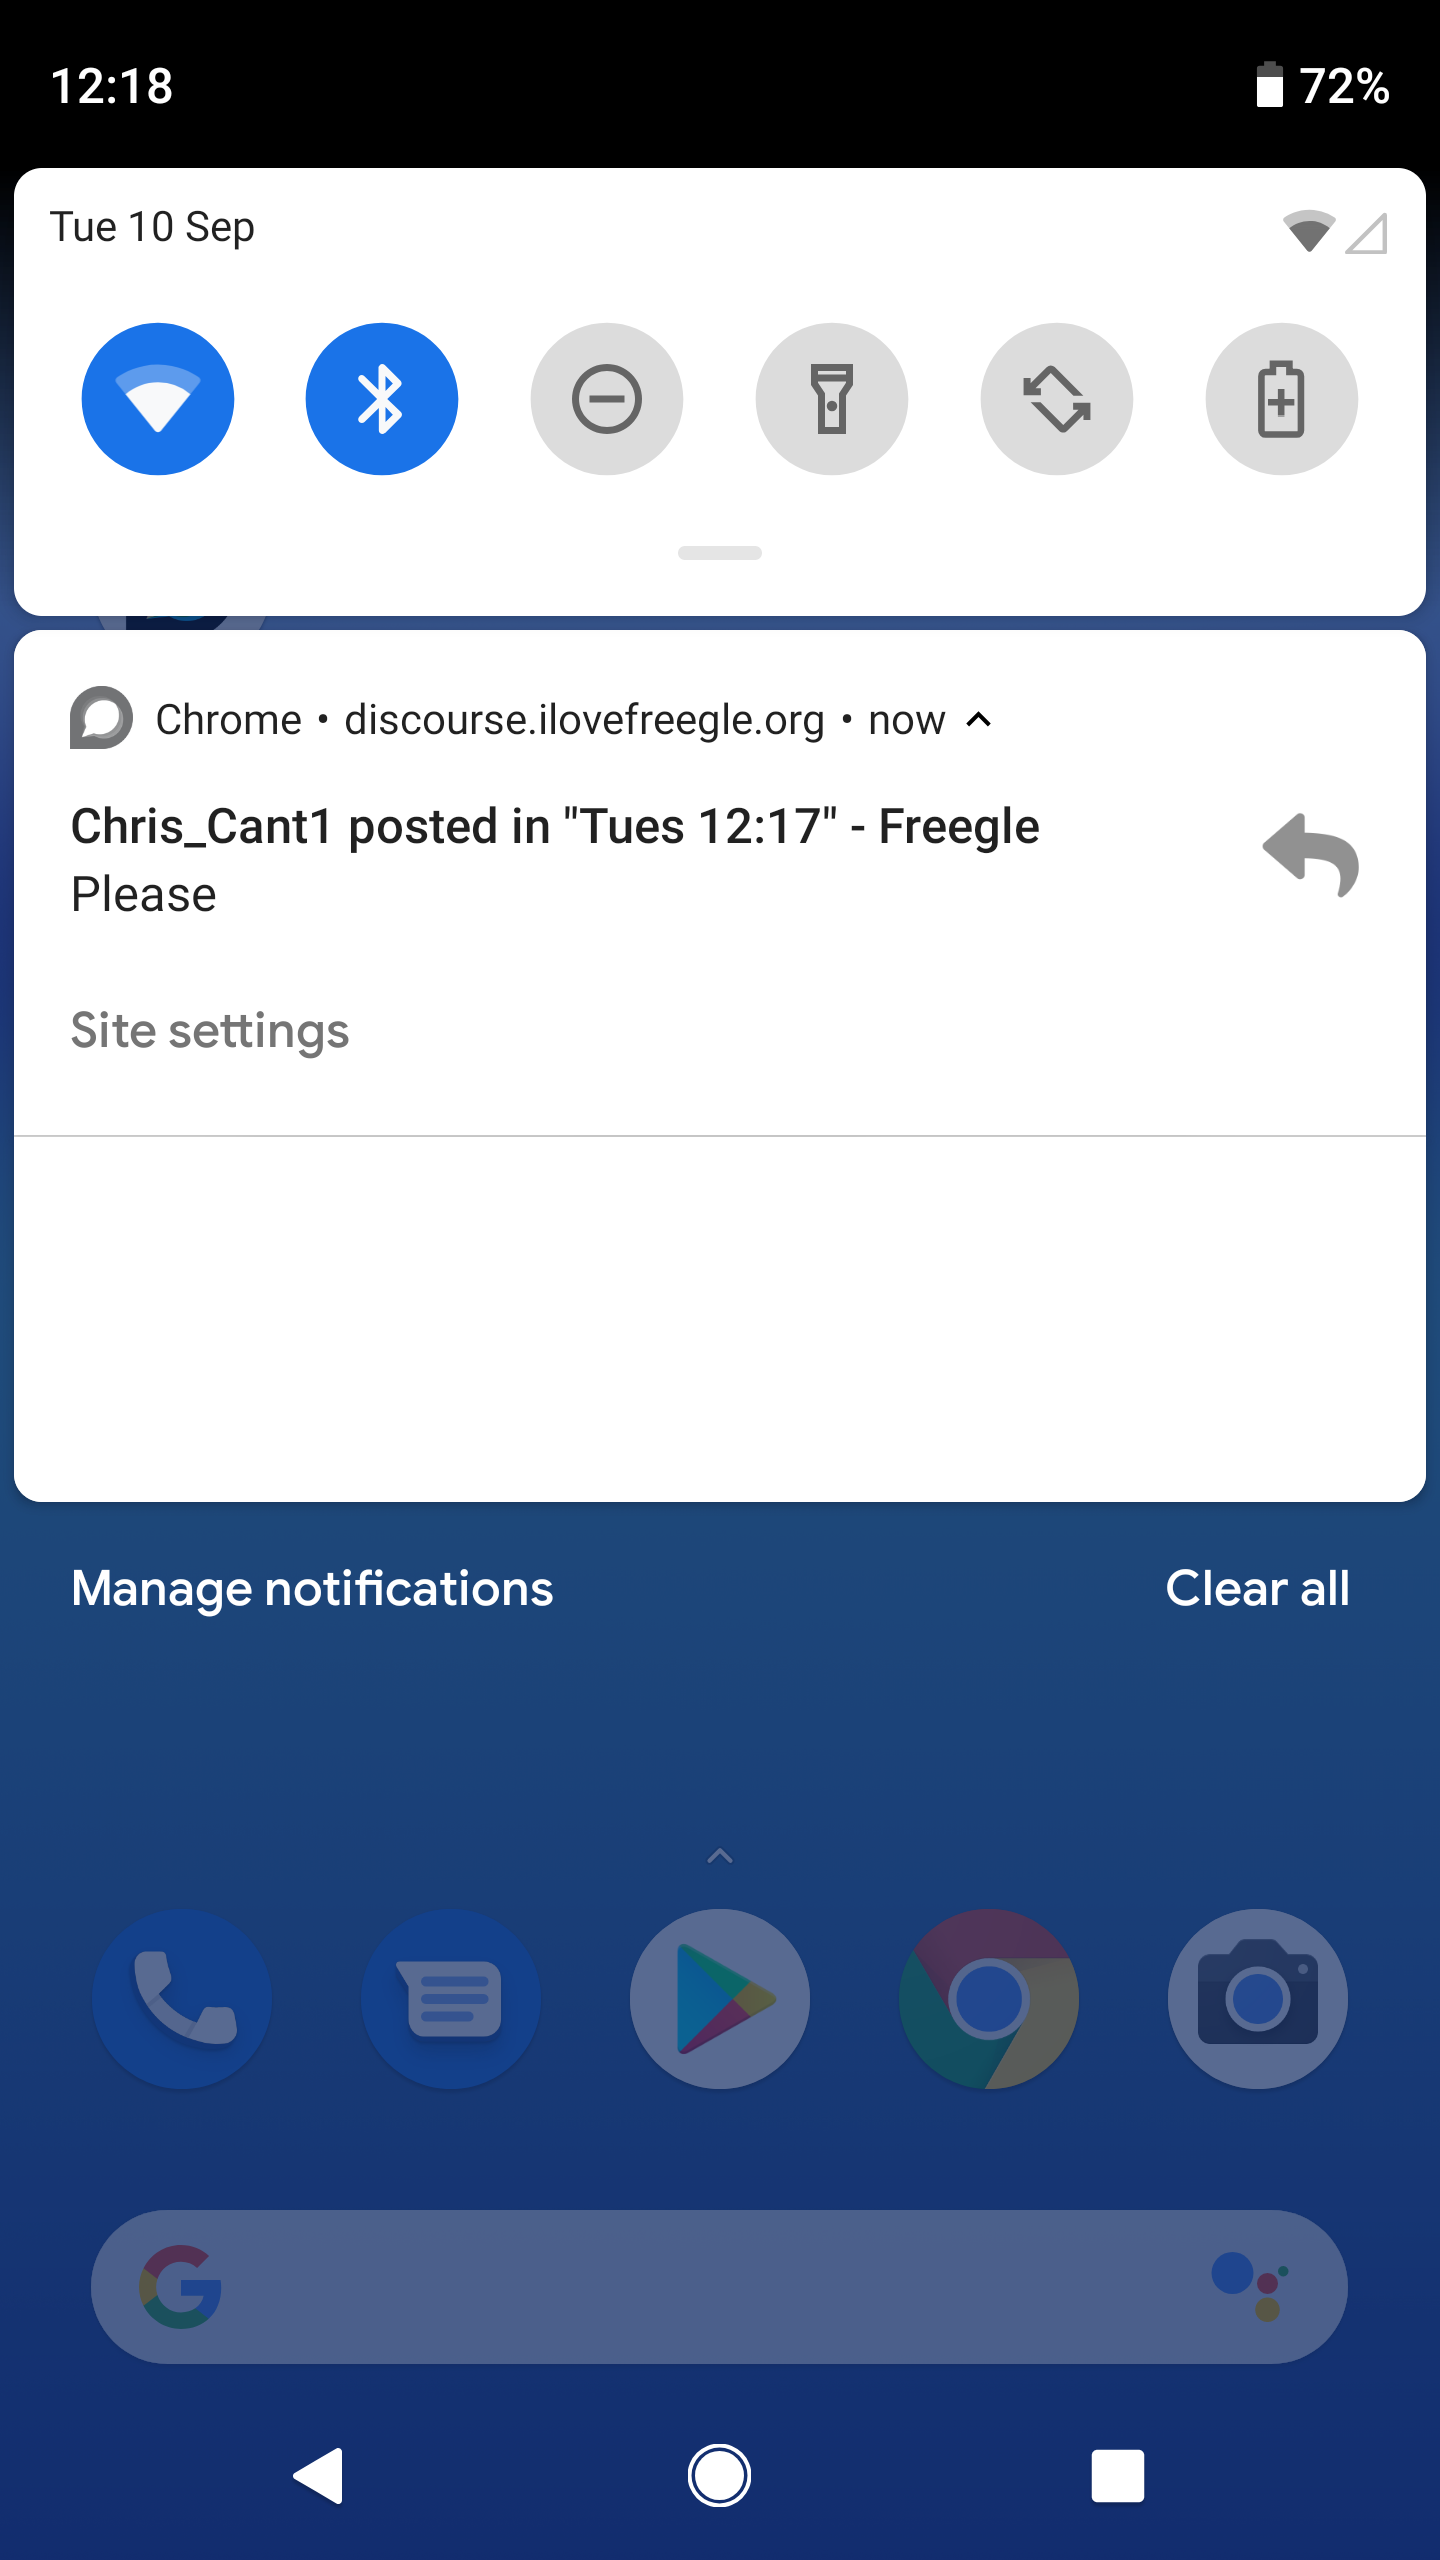 Notifications appear as normal for your phone.